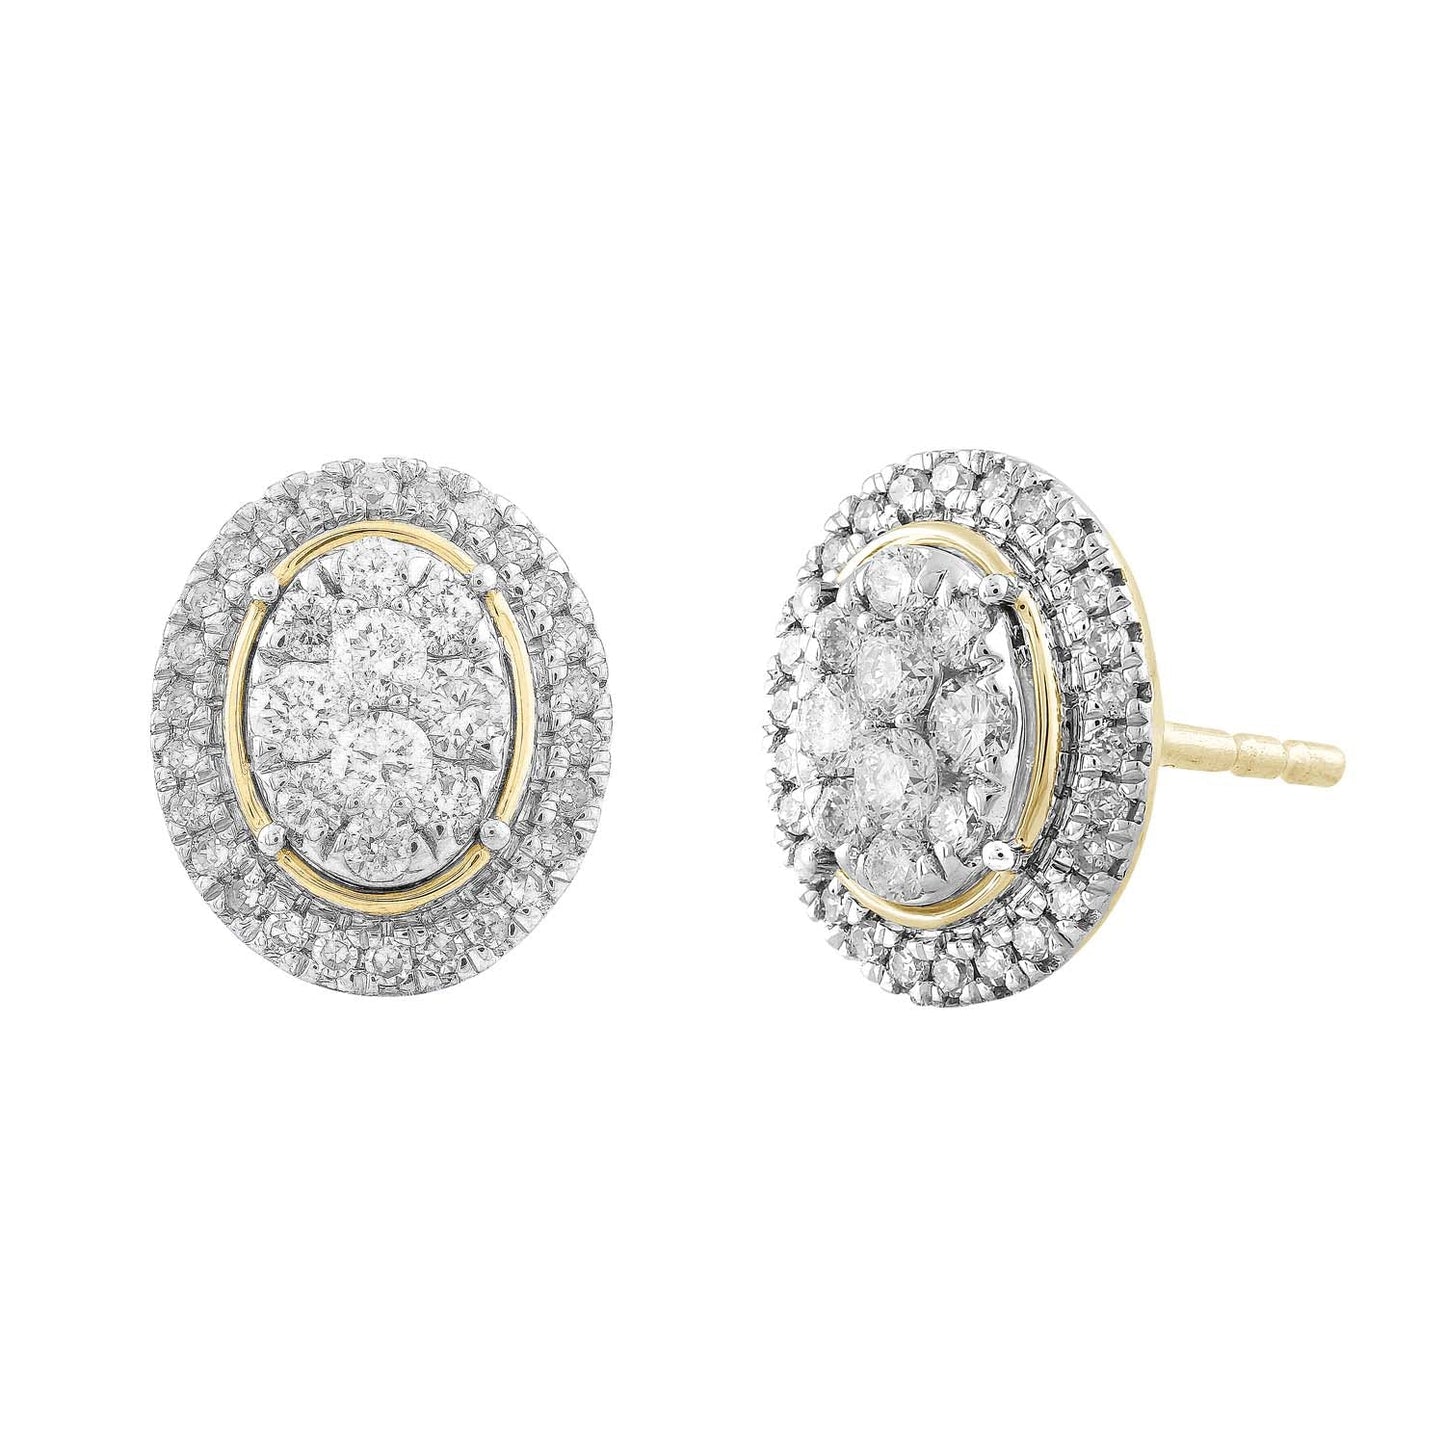 Oval Cluster Earrings with 0.50ct Diamond in 9K Yellow Gold